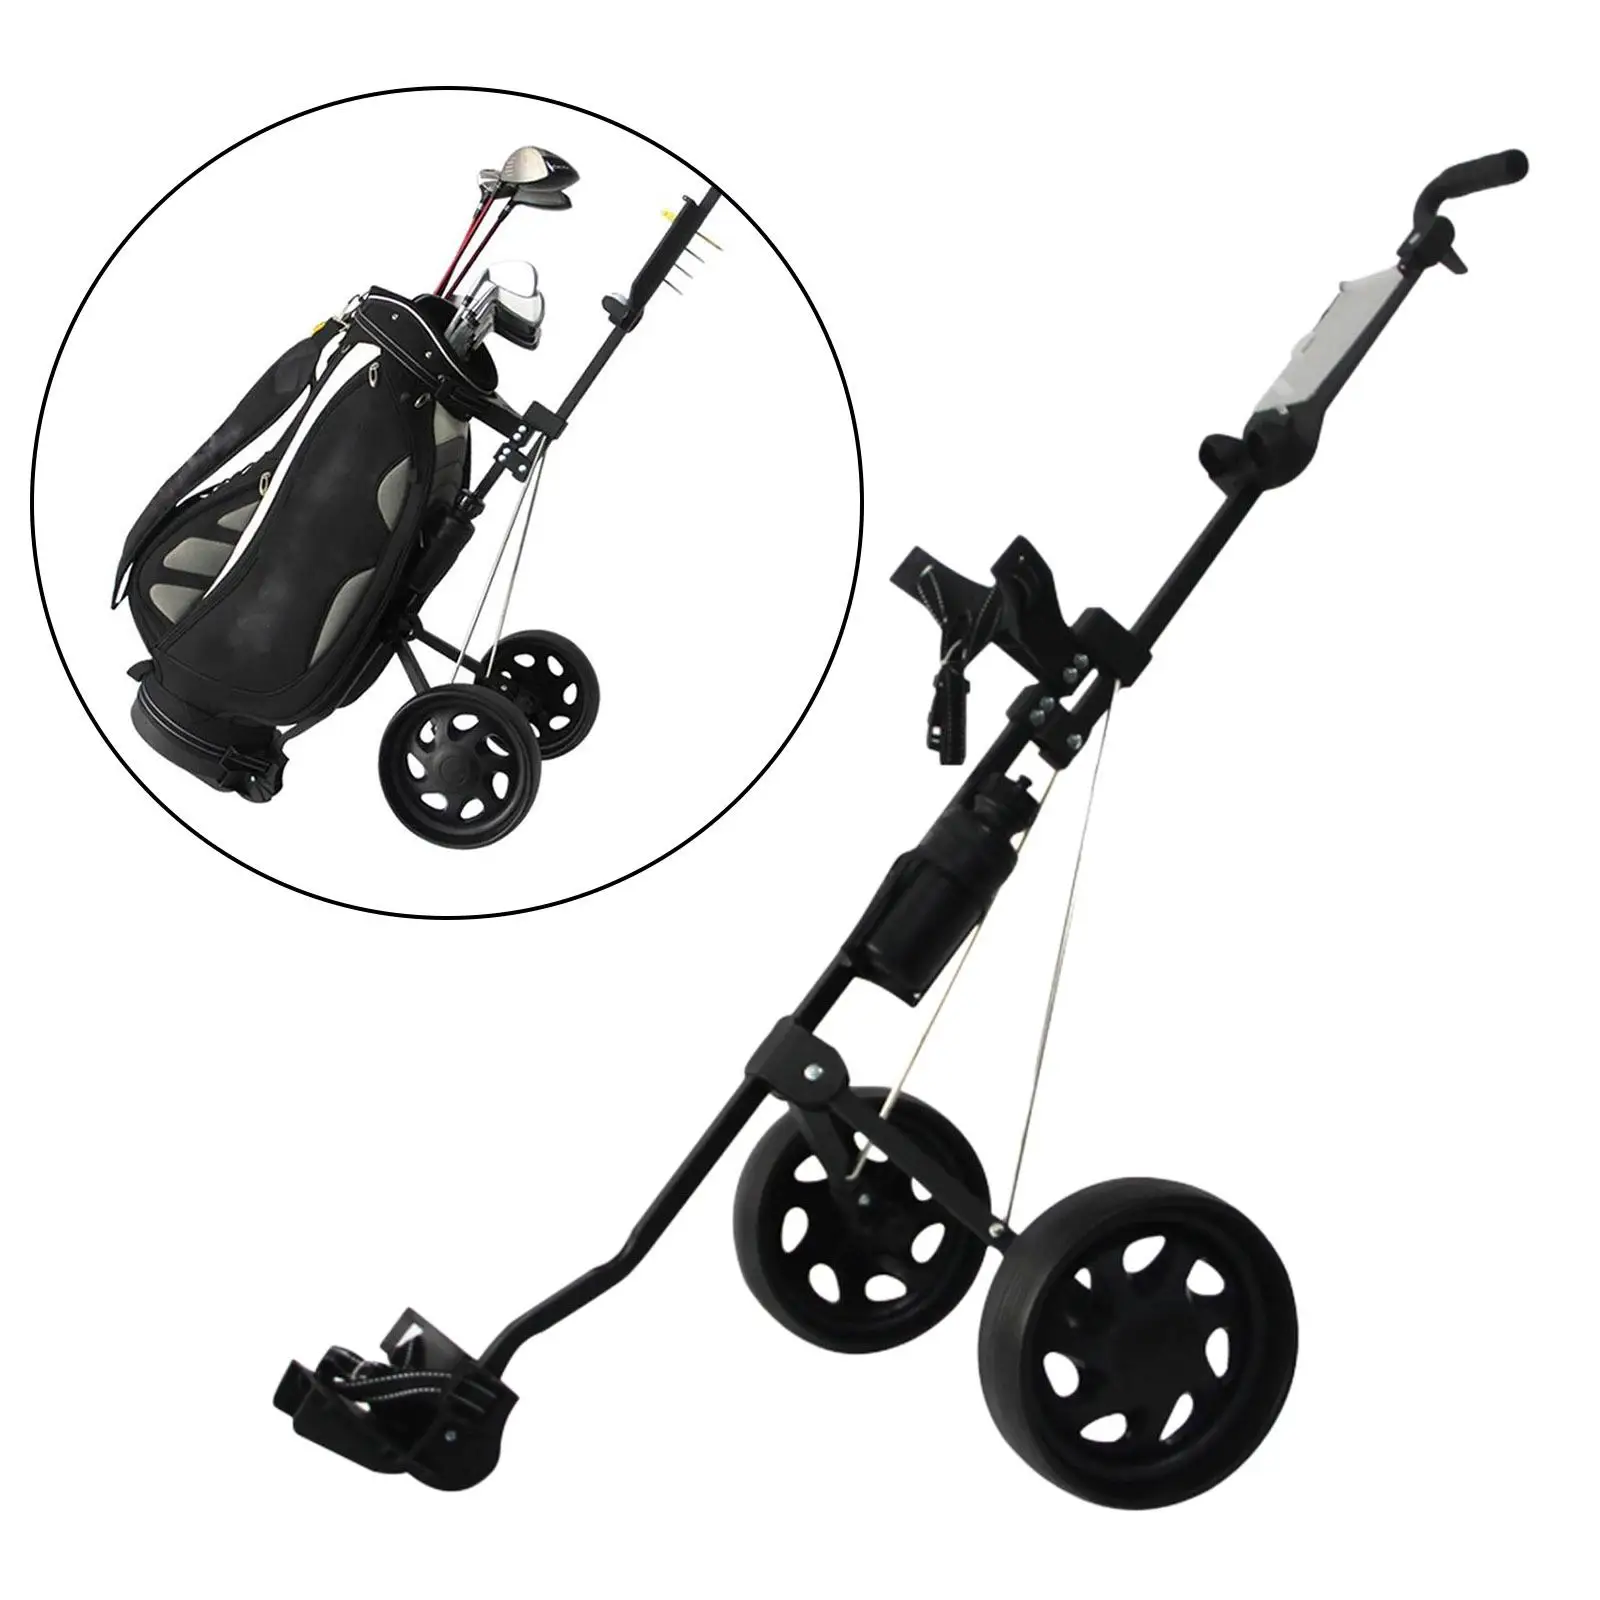 2 Golf Push Pull Cart Collapsible Golf Trolley Carry Holder Accessories